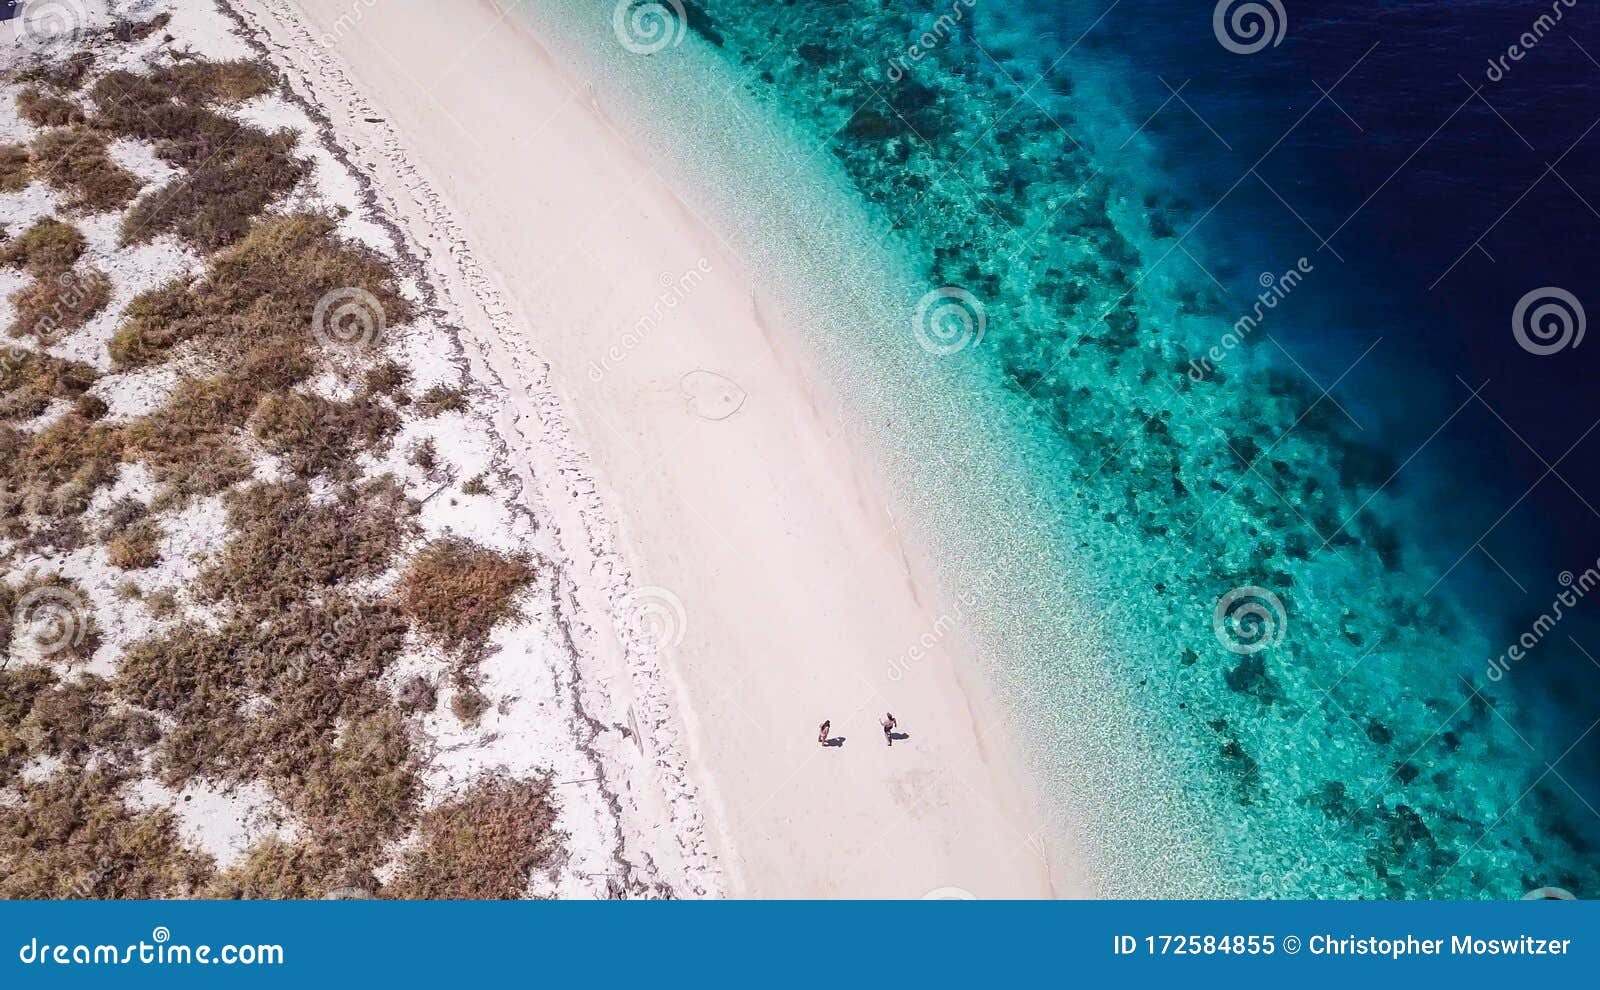 maumere - a drone shot of a couple playing on a white sand beach